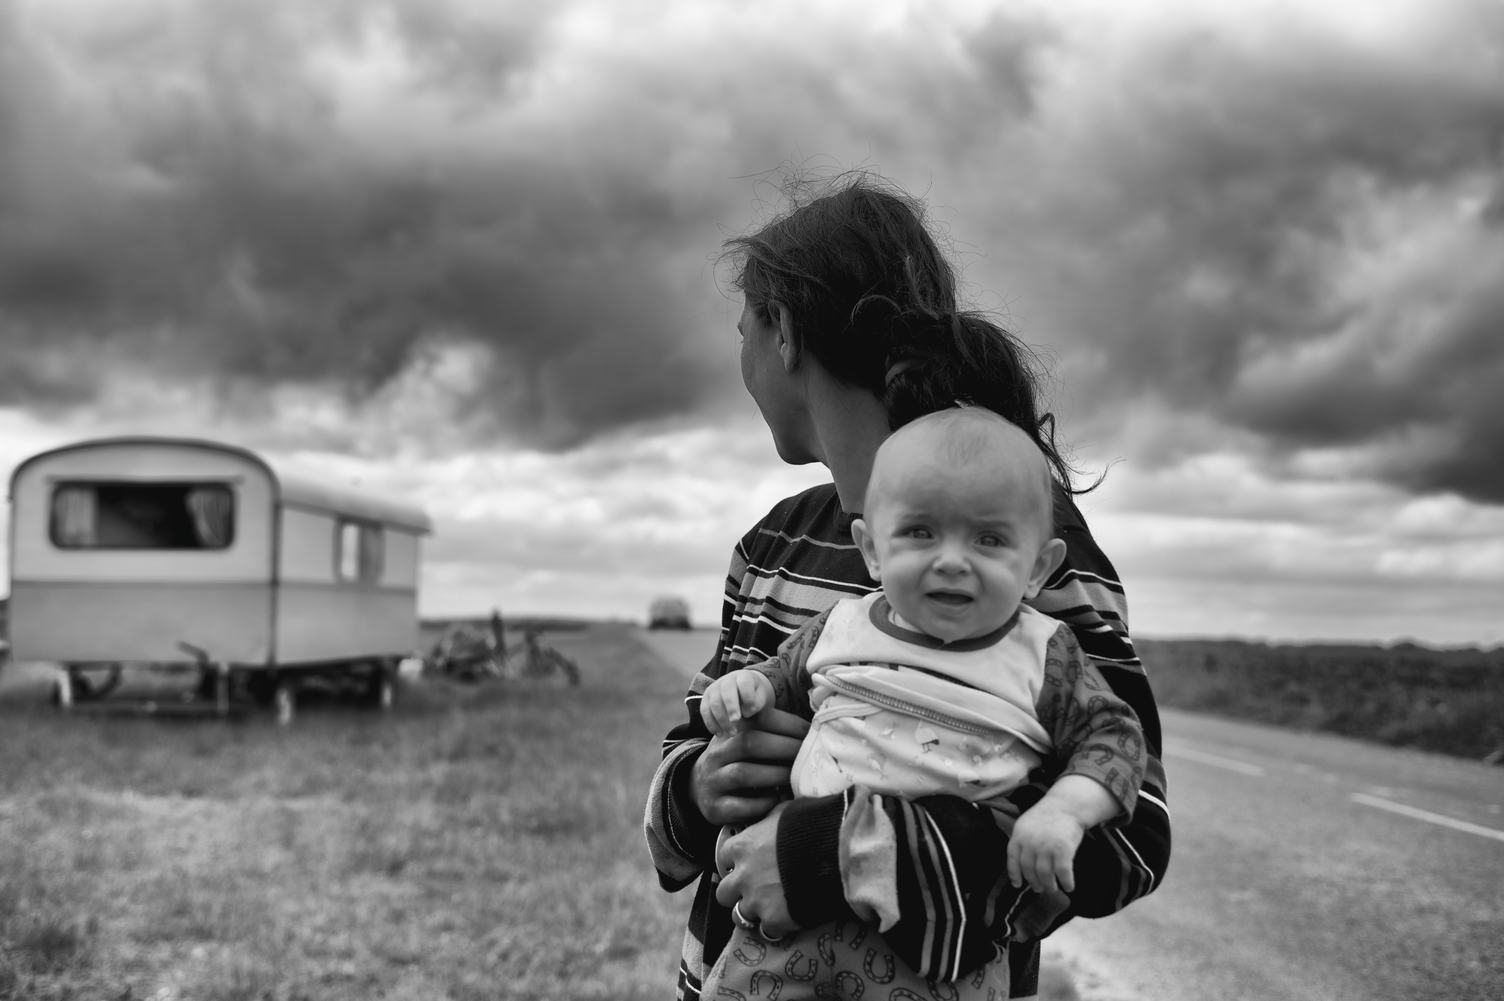 Black & White Image of Mother and her Baby Son Outdoors